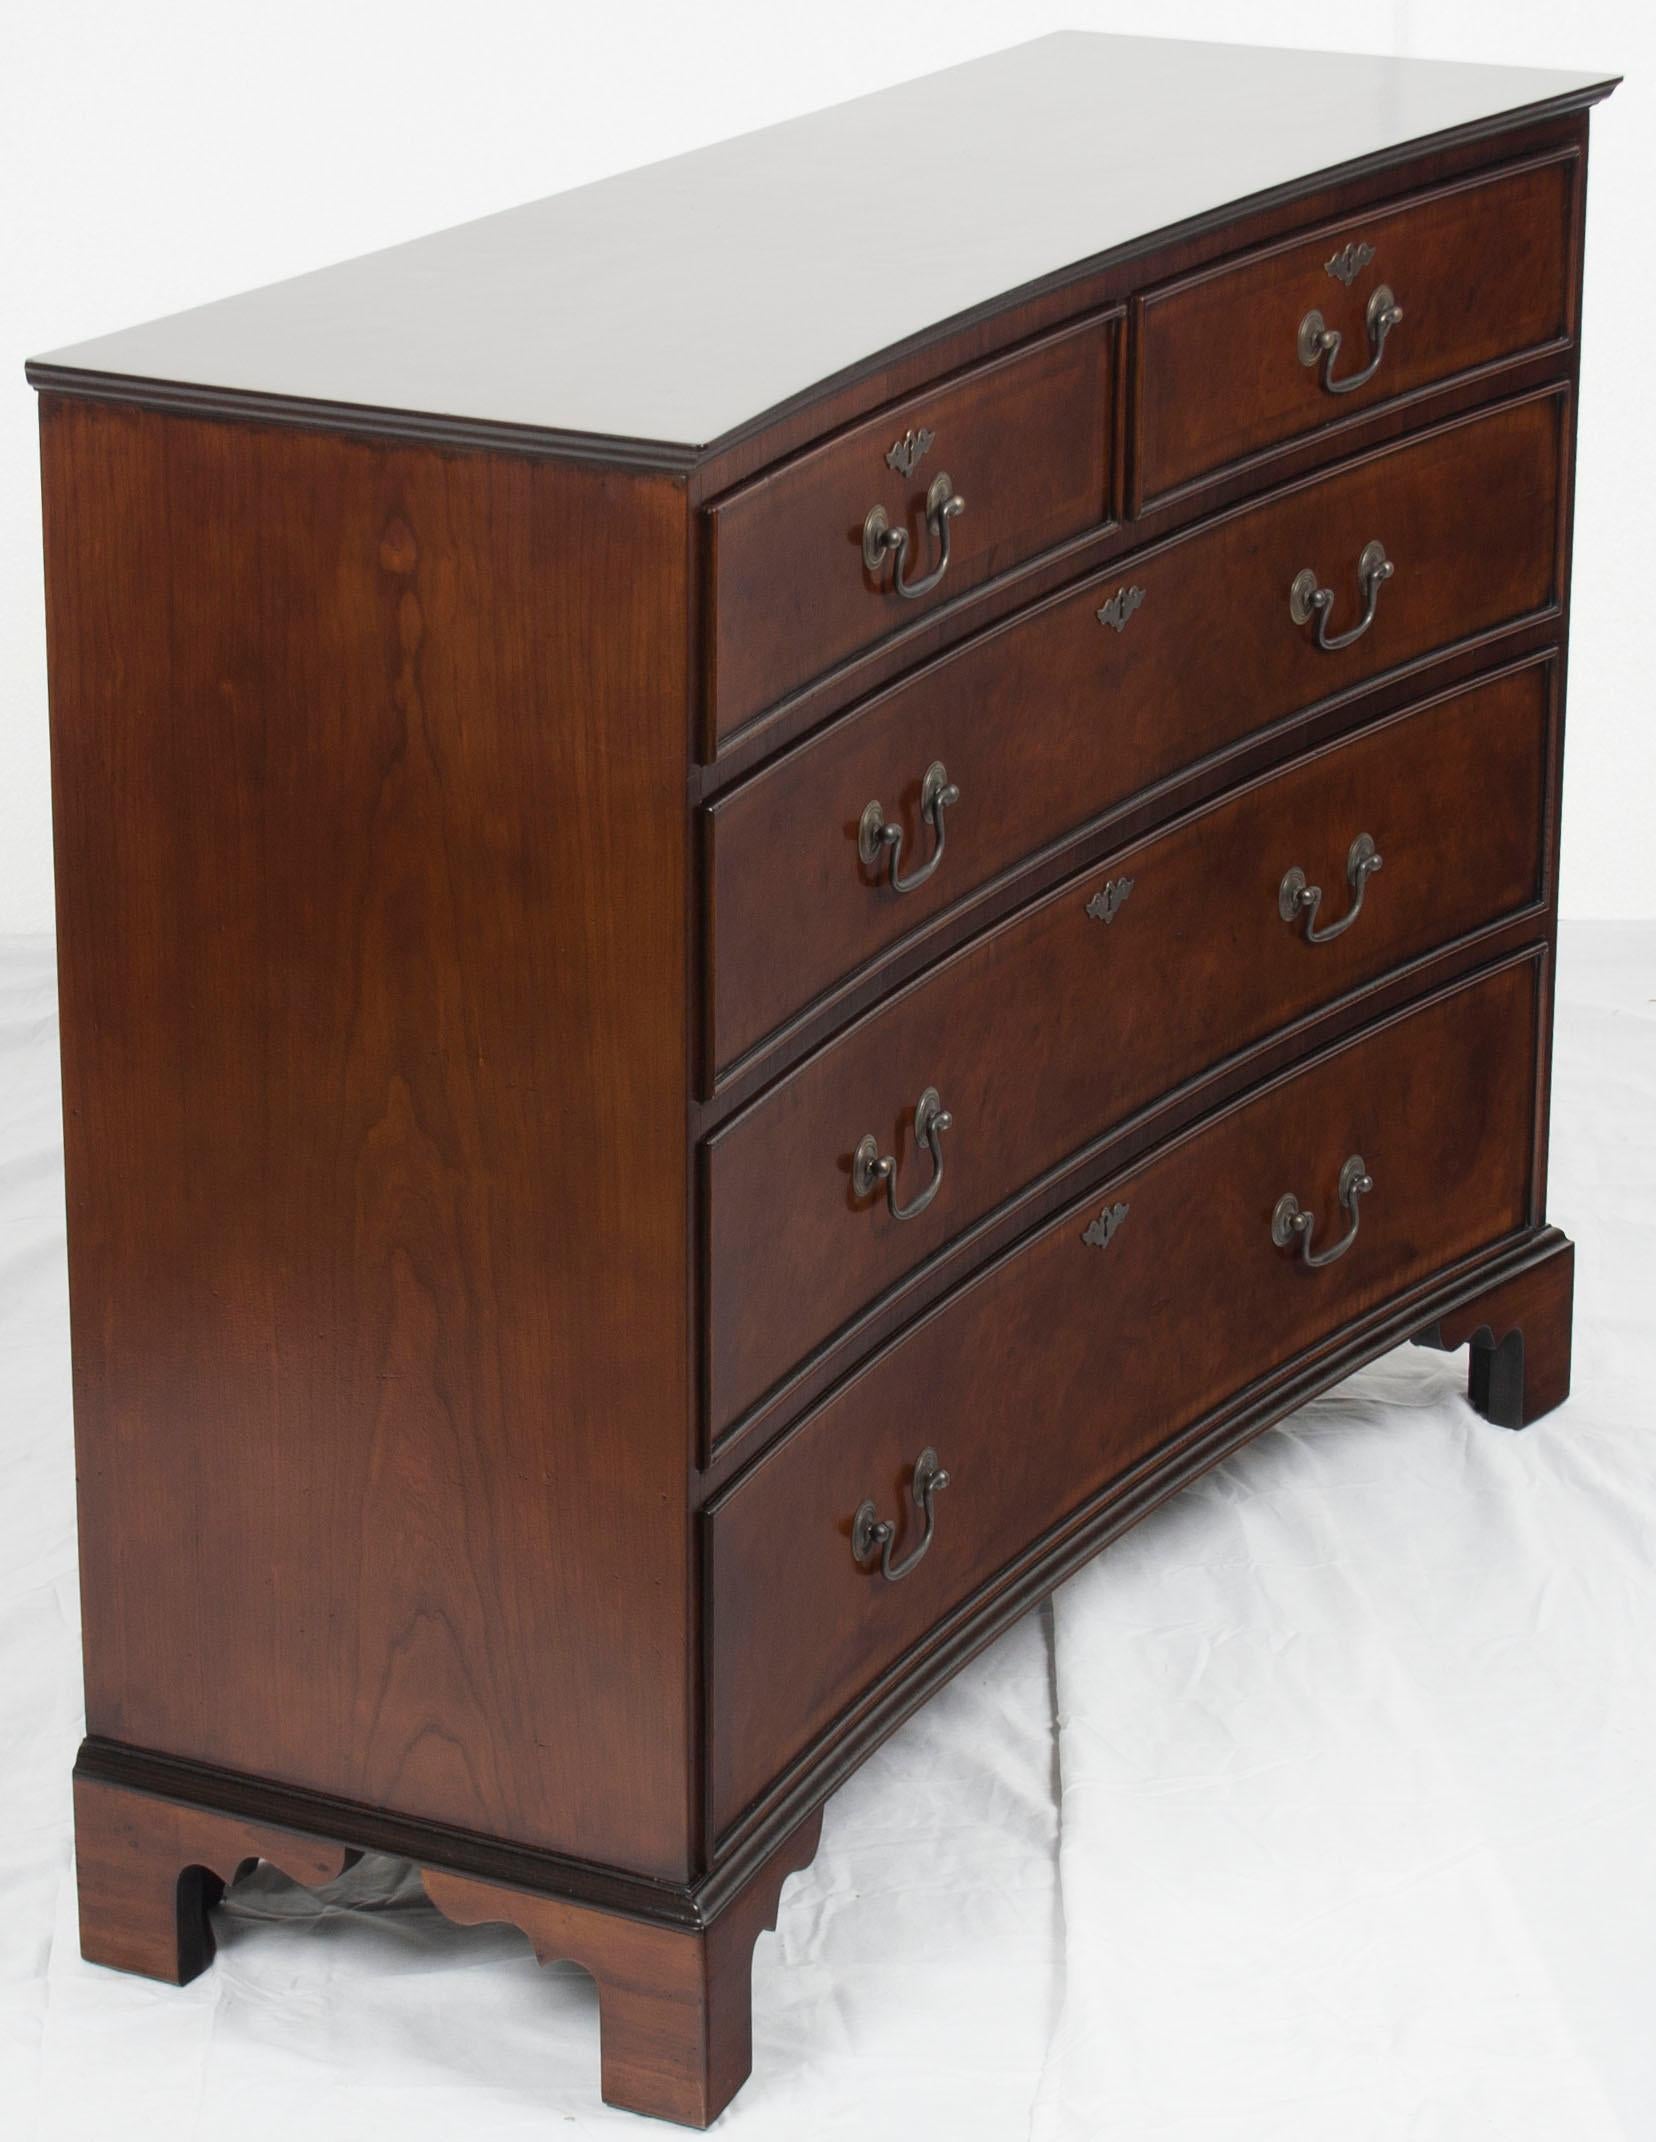 English Inverted or Reverse Bow Front Narrow Chest of Drawers Dresser For Sale